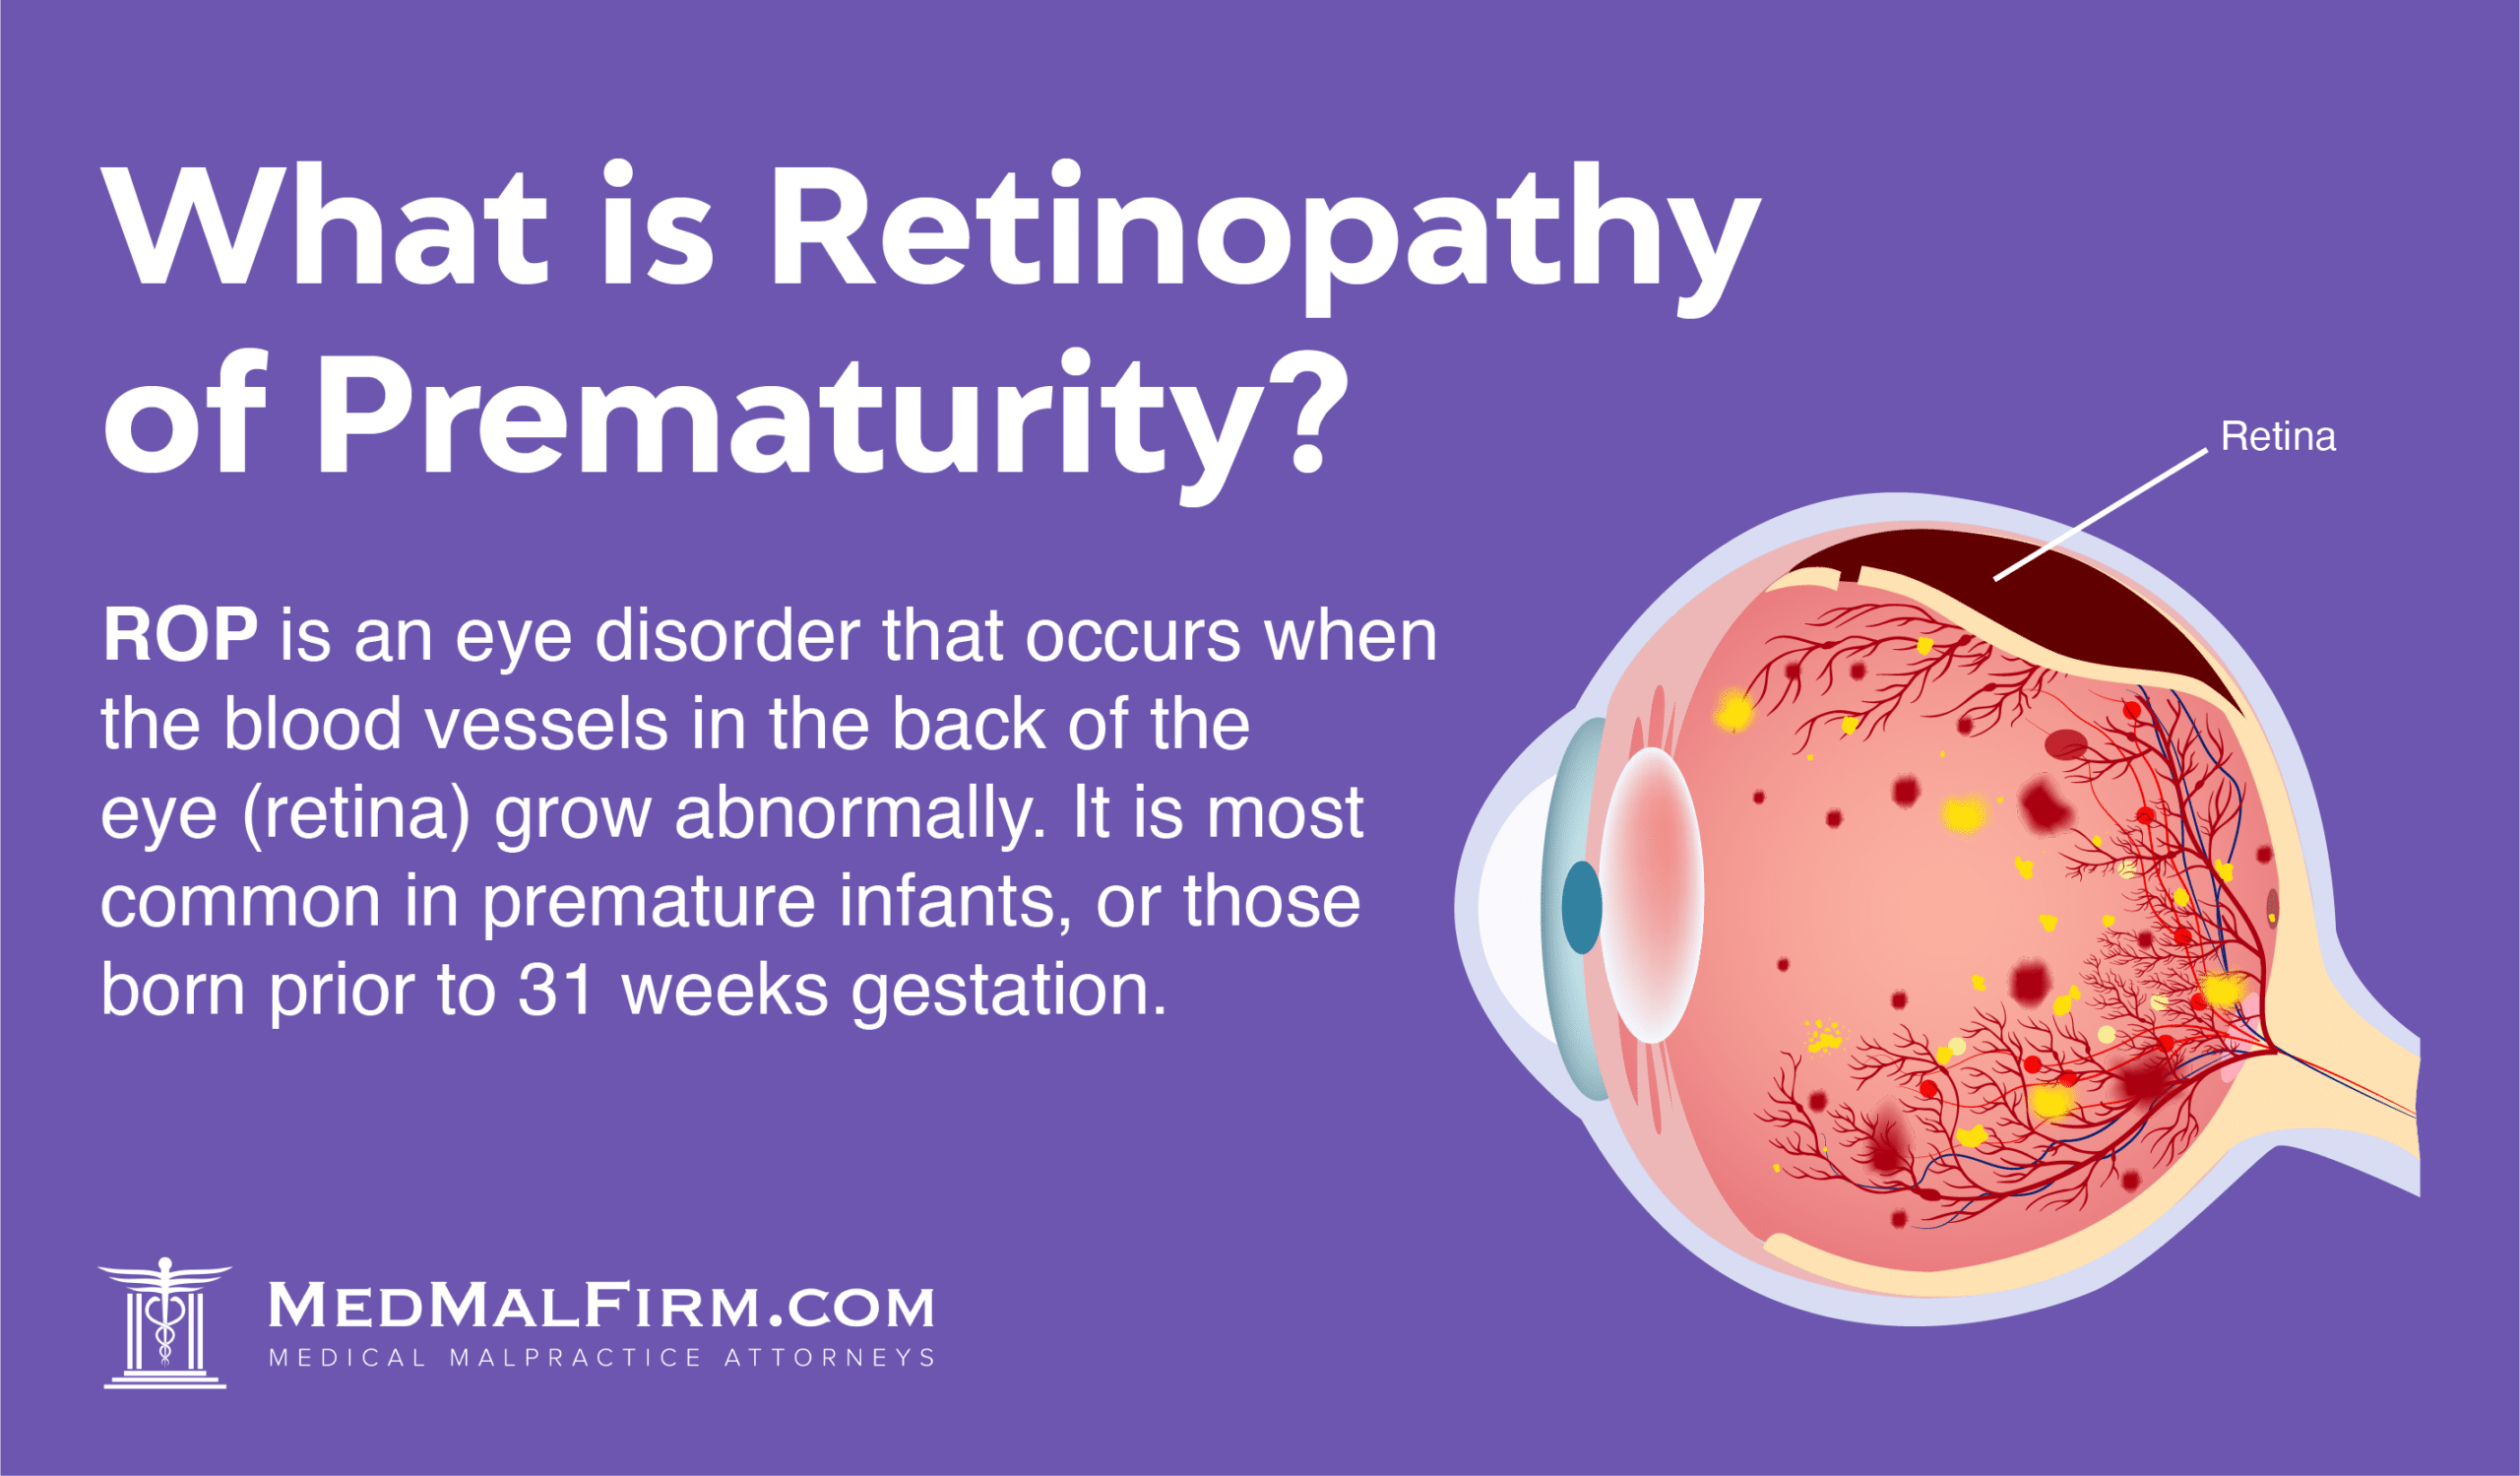 What is Retinopathy of Prematurity?